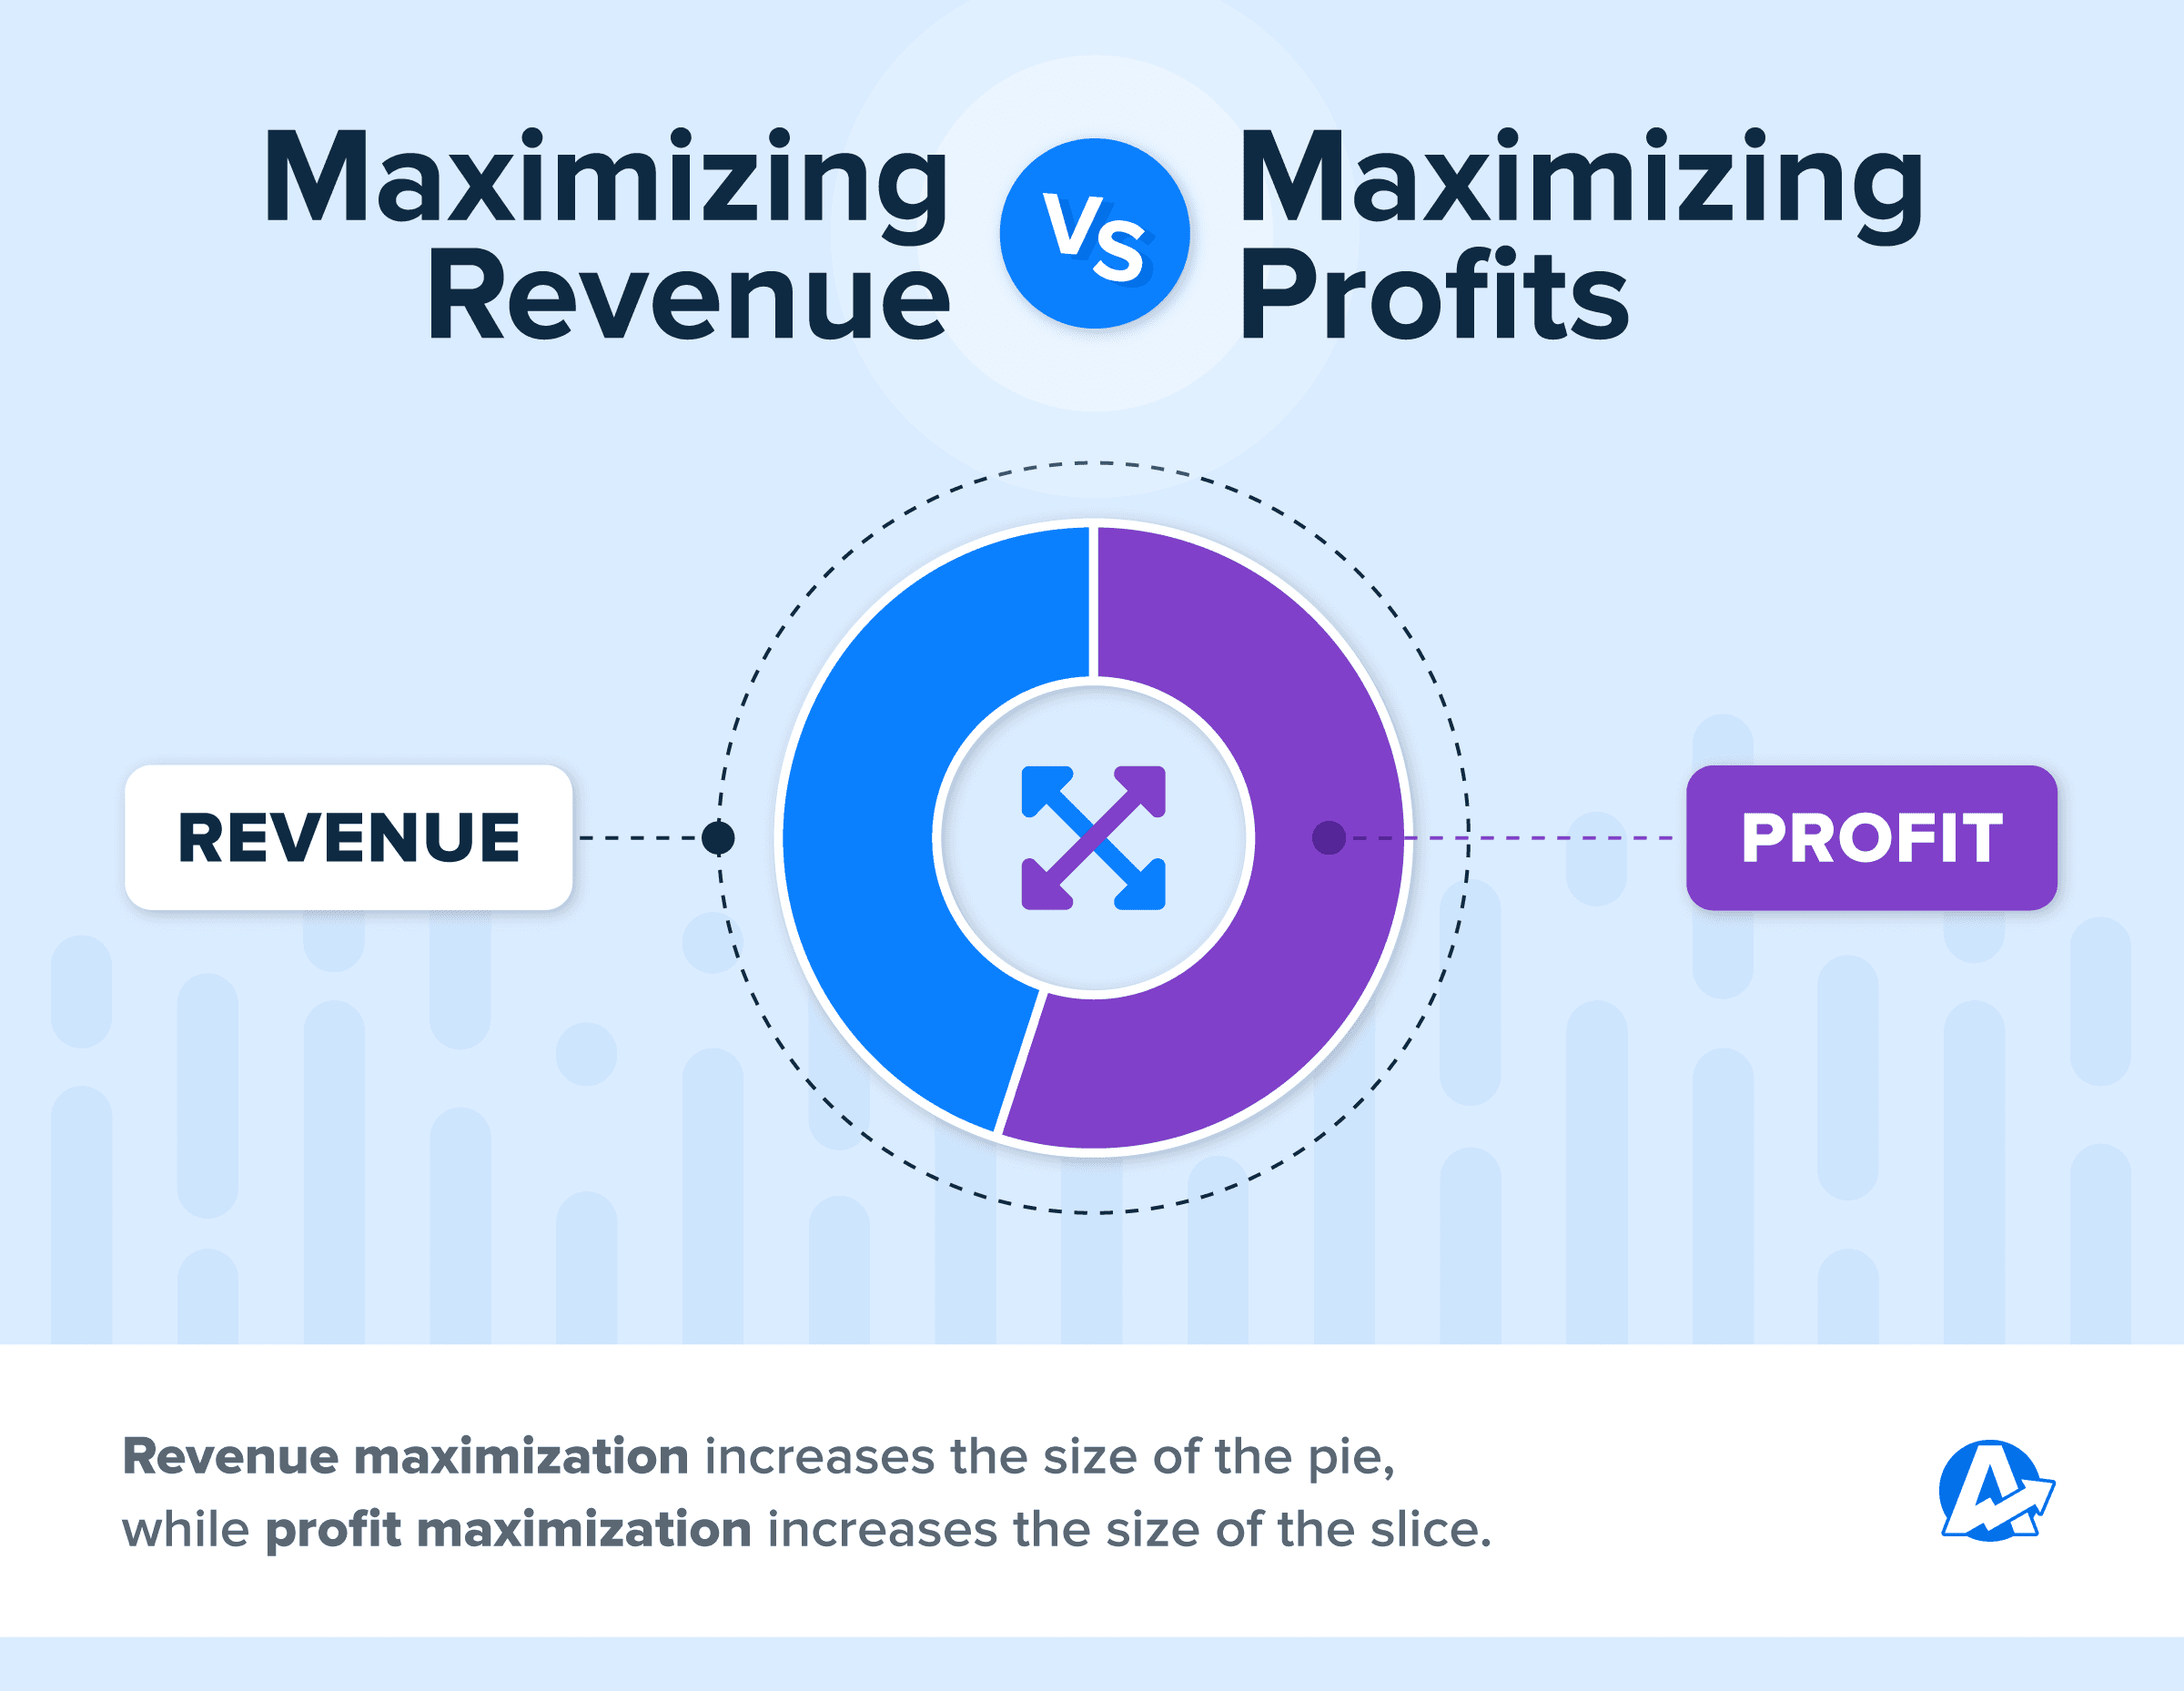 Chart showing the difference between revenue maximization and profit maximization in a pie chart where revenue maximization increases the size of the pie, while profit maximization increases the size of the slice